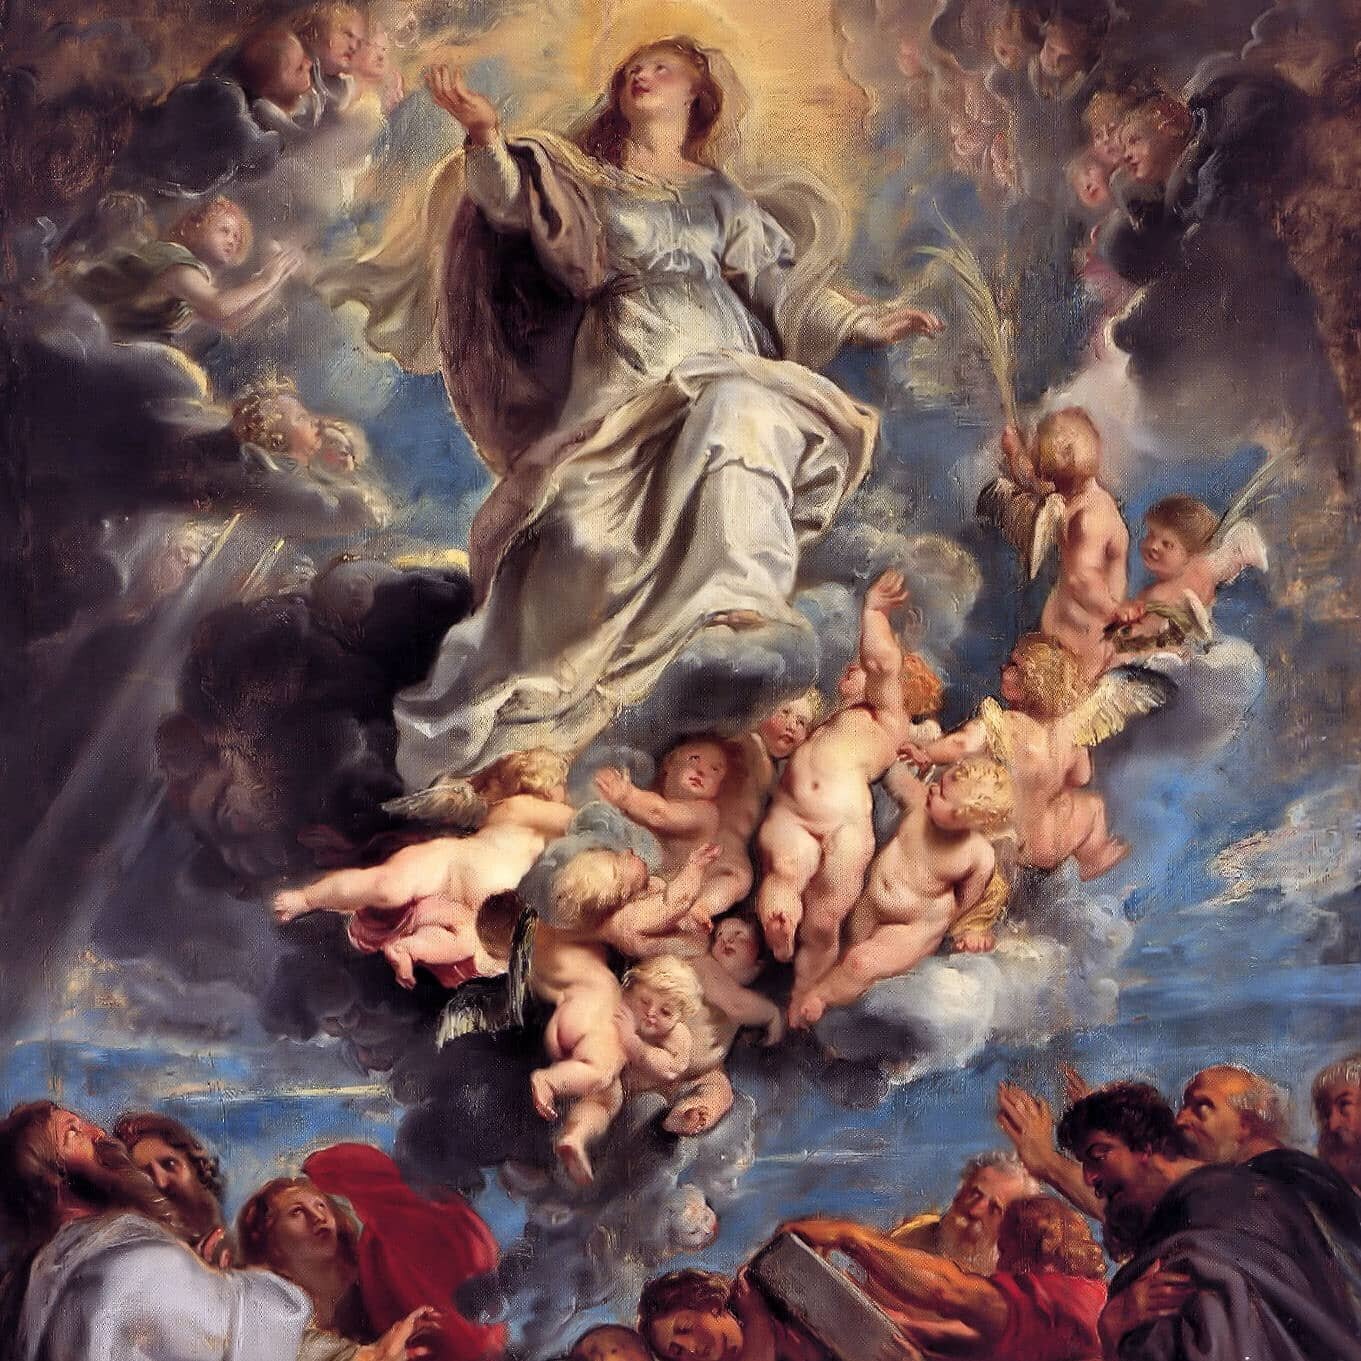 Buona Festa di Maria Assunta.​⁣
​⁣
Today is the Assumption of the Blessed Virgin Mary and the 789th anniversary of the Servite Order's founding. We also wish our sister parish, @assumptionwelby, a buon onomastico!​⁣
​⁣
Preghiamo:⁣
(Prayer of St. Aloy